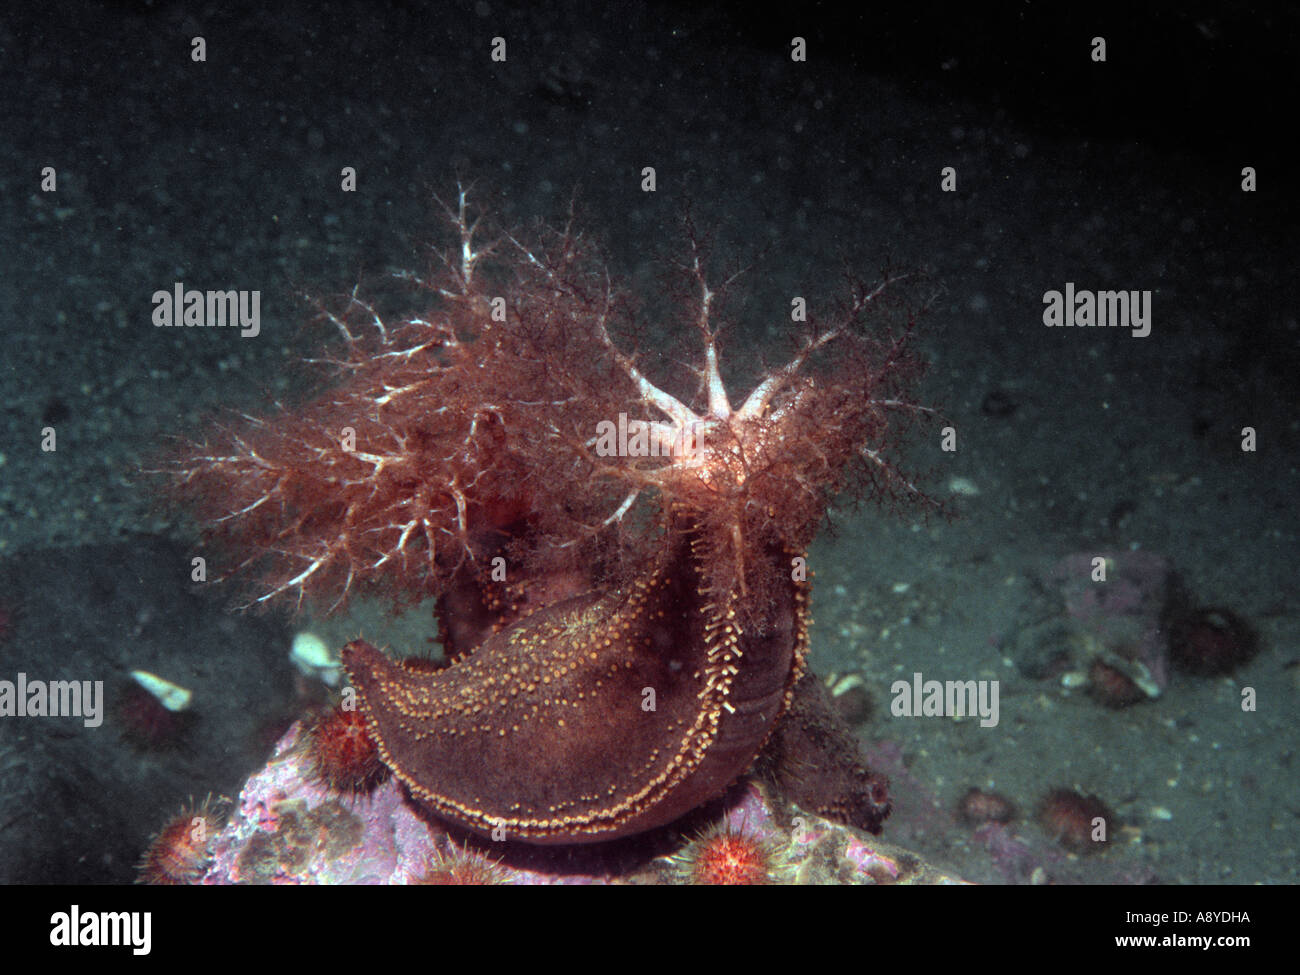 Two specimens of edible marine benthic holothurians Cucumaria djakonovi sitting on a stone and spreading tentacles North Pacific Stock Photo